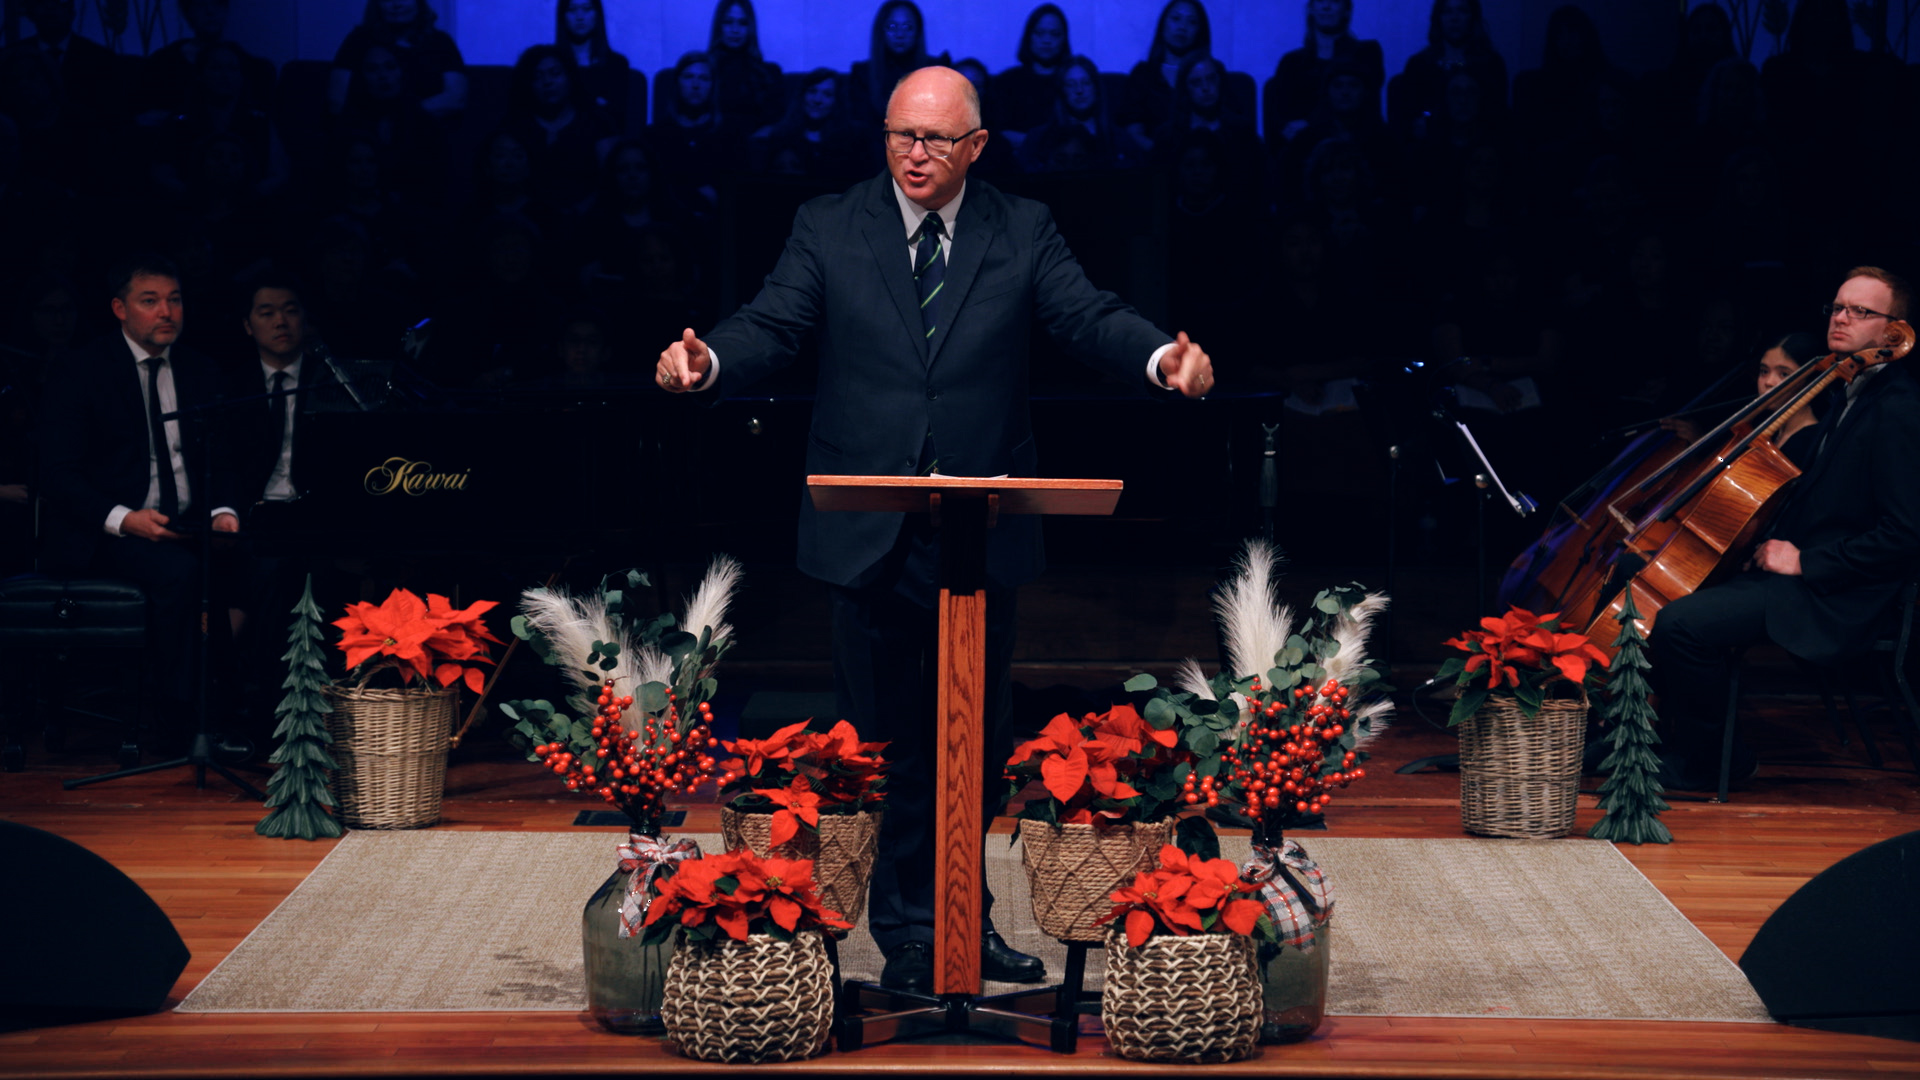 Pastor Paul Chappell: Peace In Your Heart This Christmas